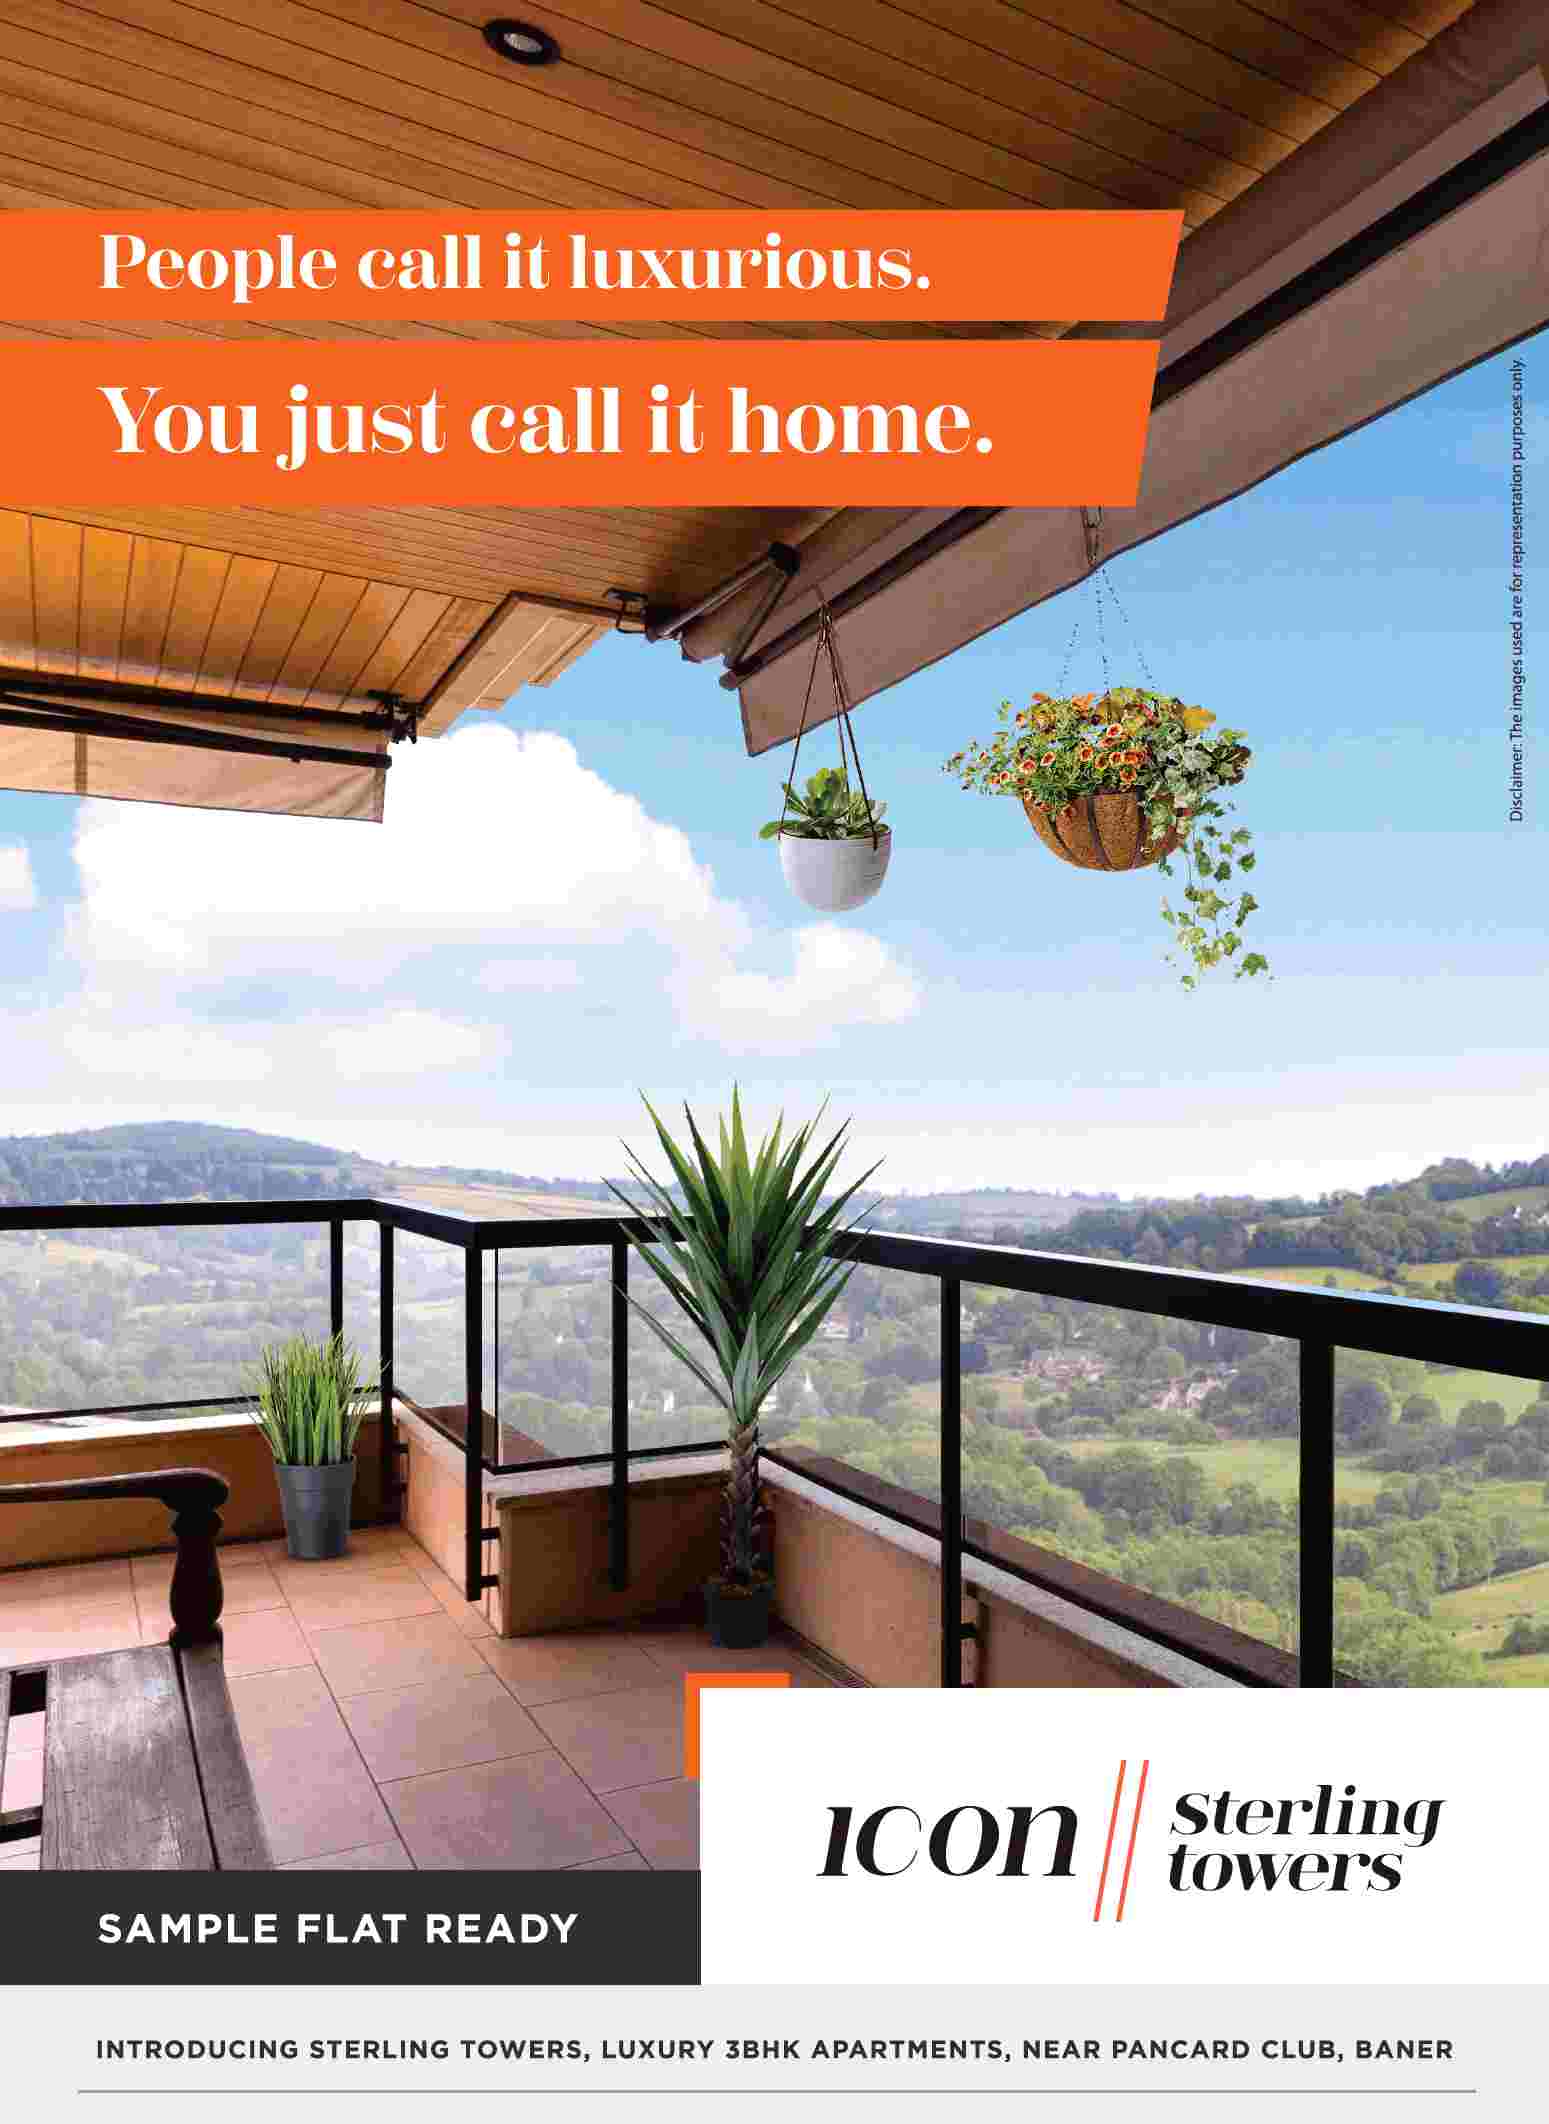 Sample flat is ready for visit at Icon Sterling Towers in Pune Update